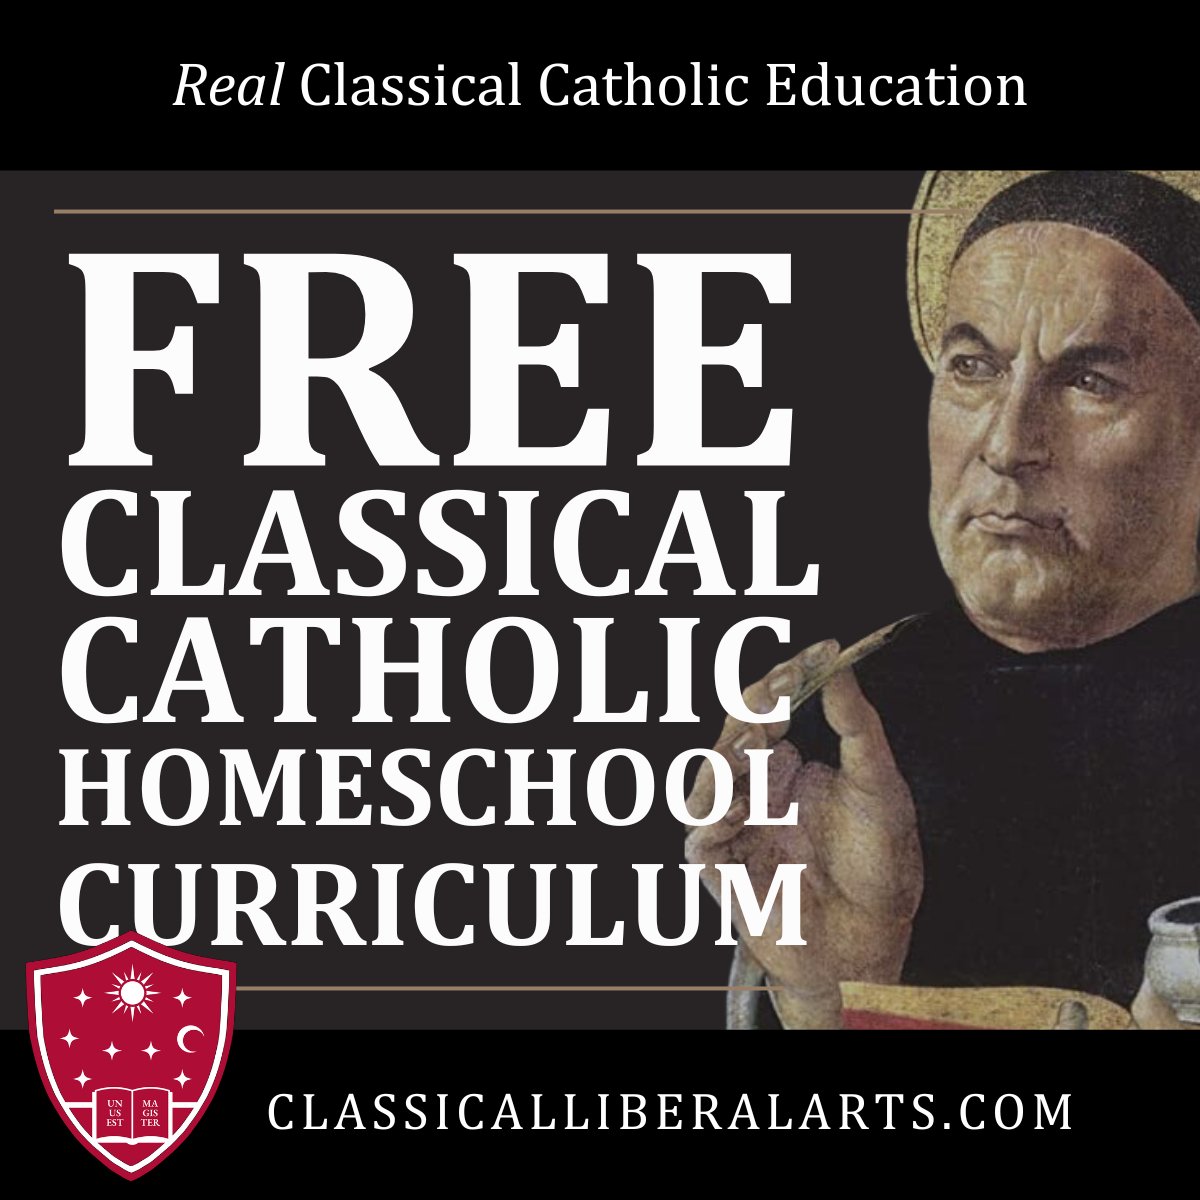 The Classical Liberal Arts Academy provides FREE access to the study materials enjoyed by wise men and saints.  Join us at classicalliberalarts.com.  #classicaleducation #homeschooling #catholiceducation #catholichomeschooling